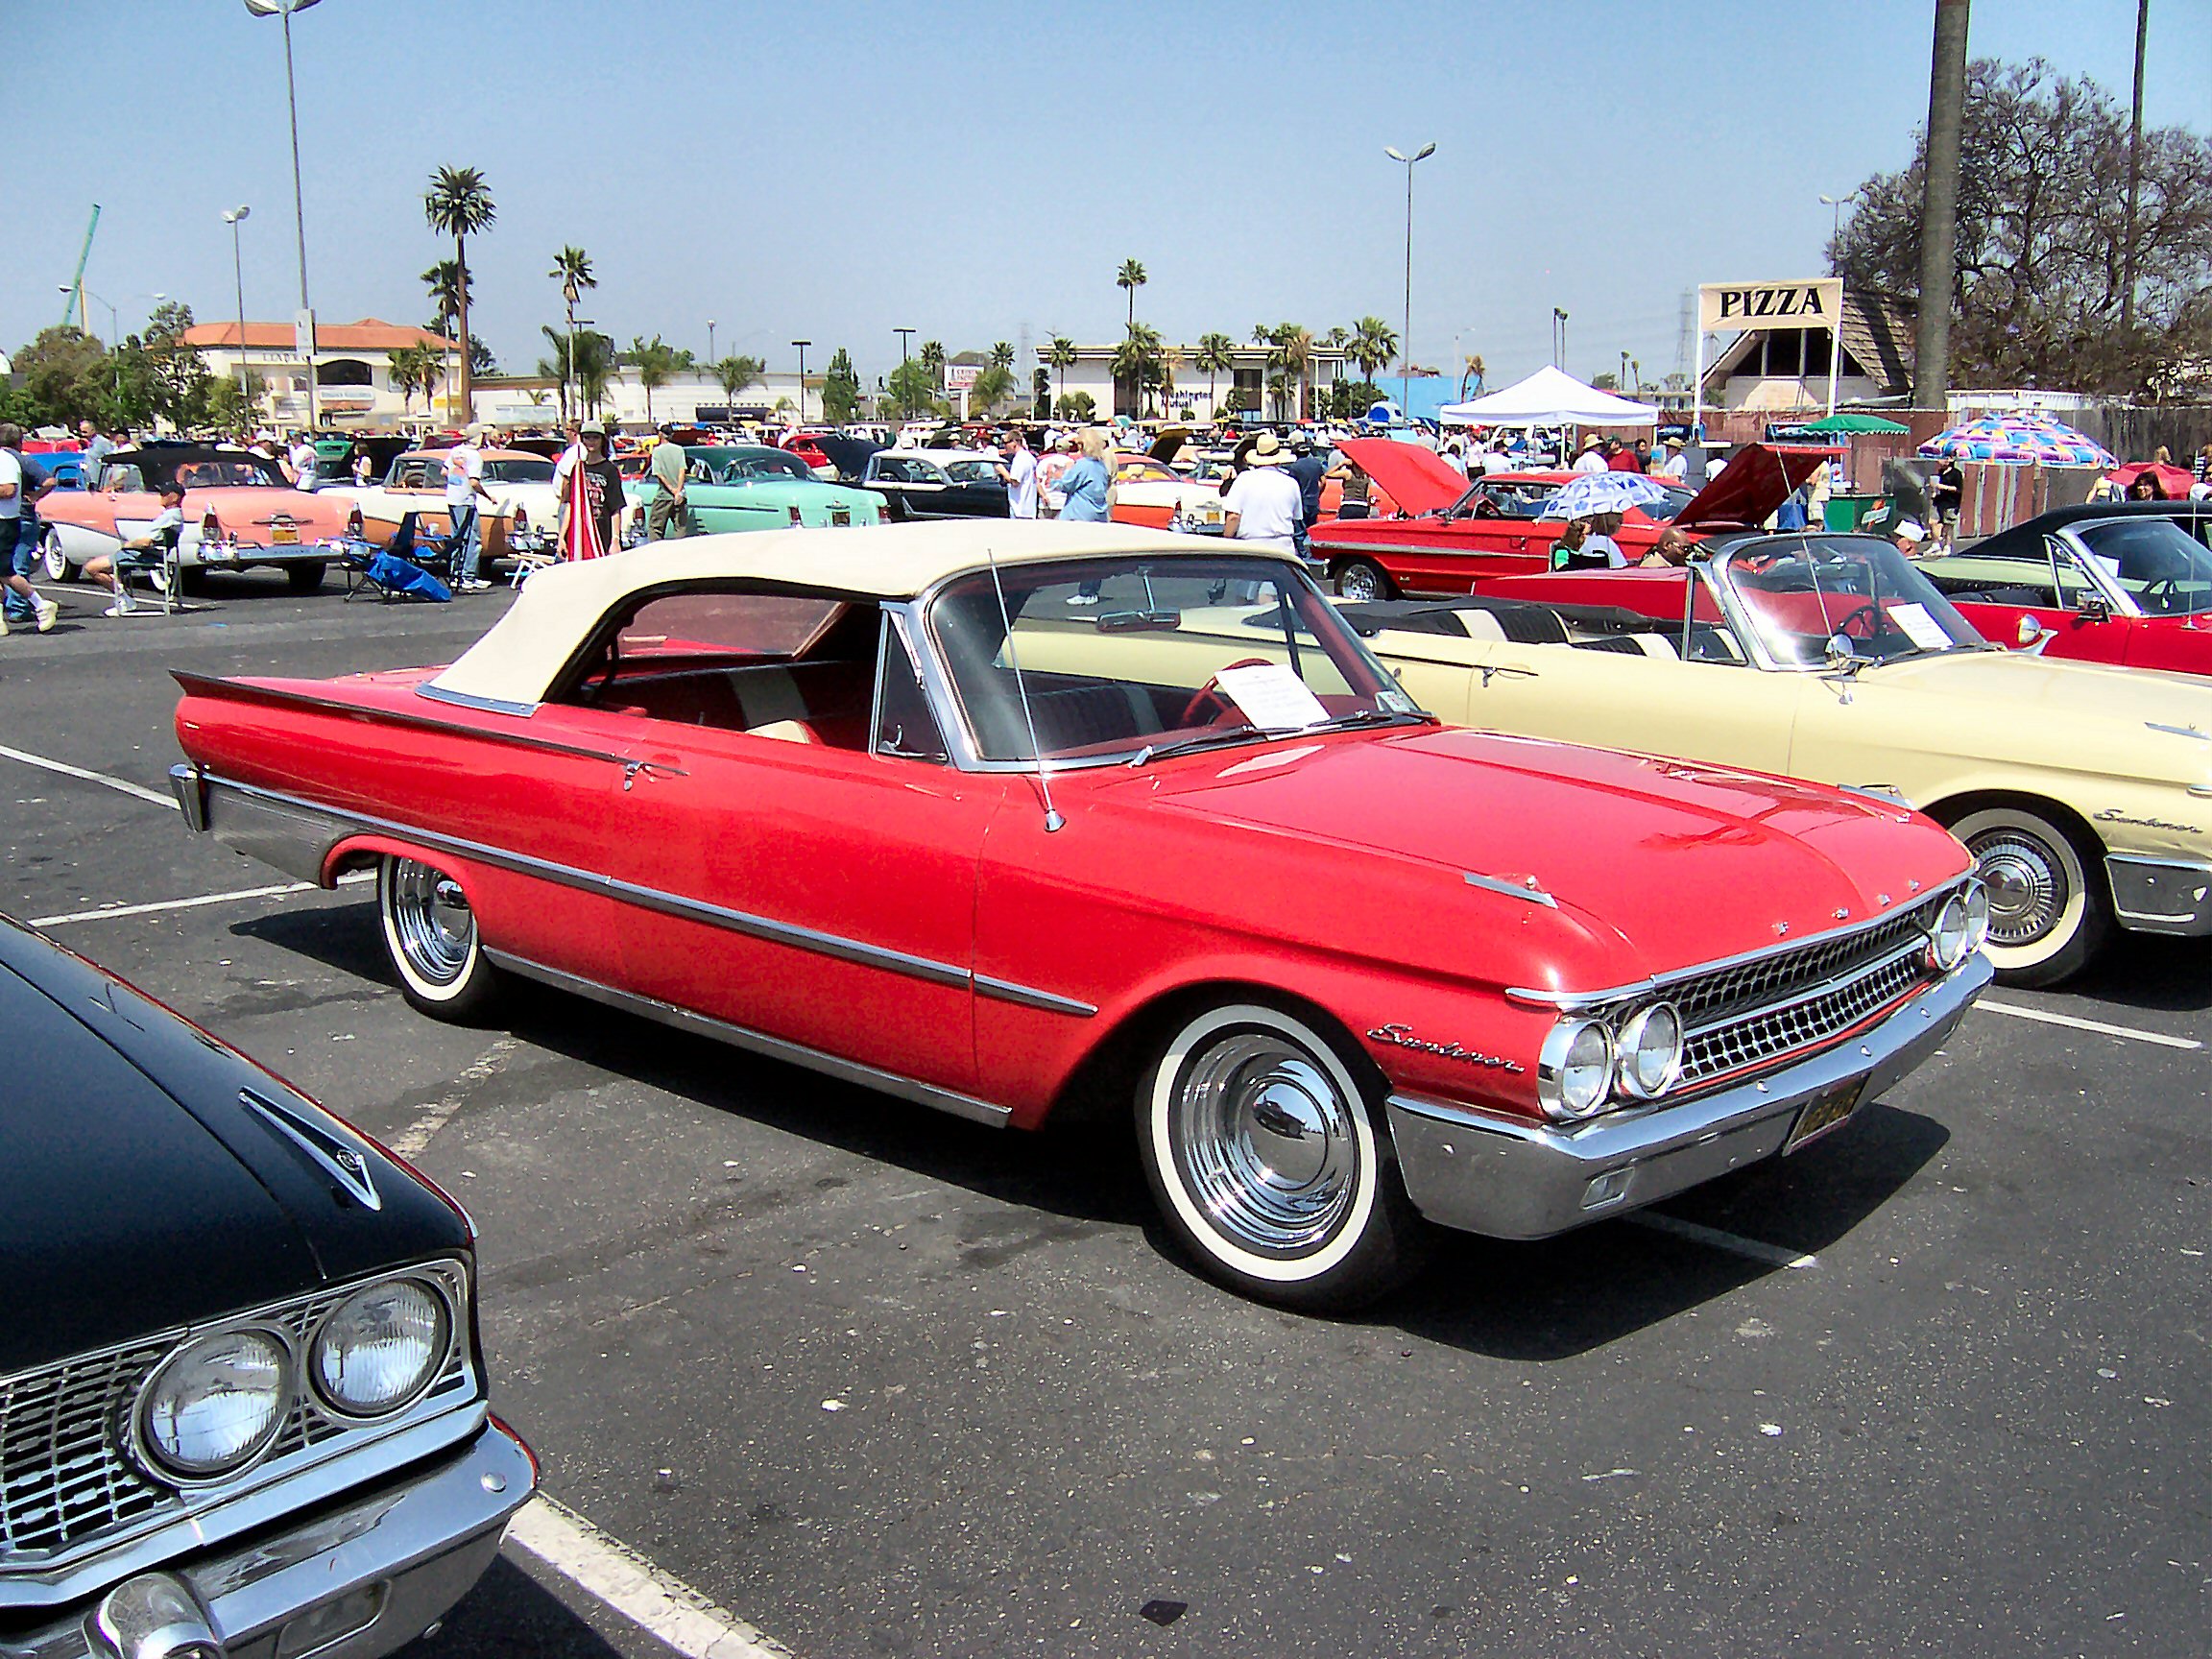 Ford Galaxie Sunliner